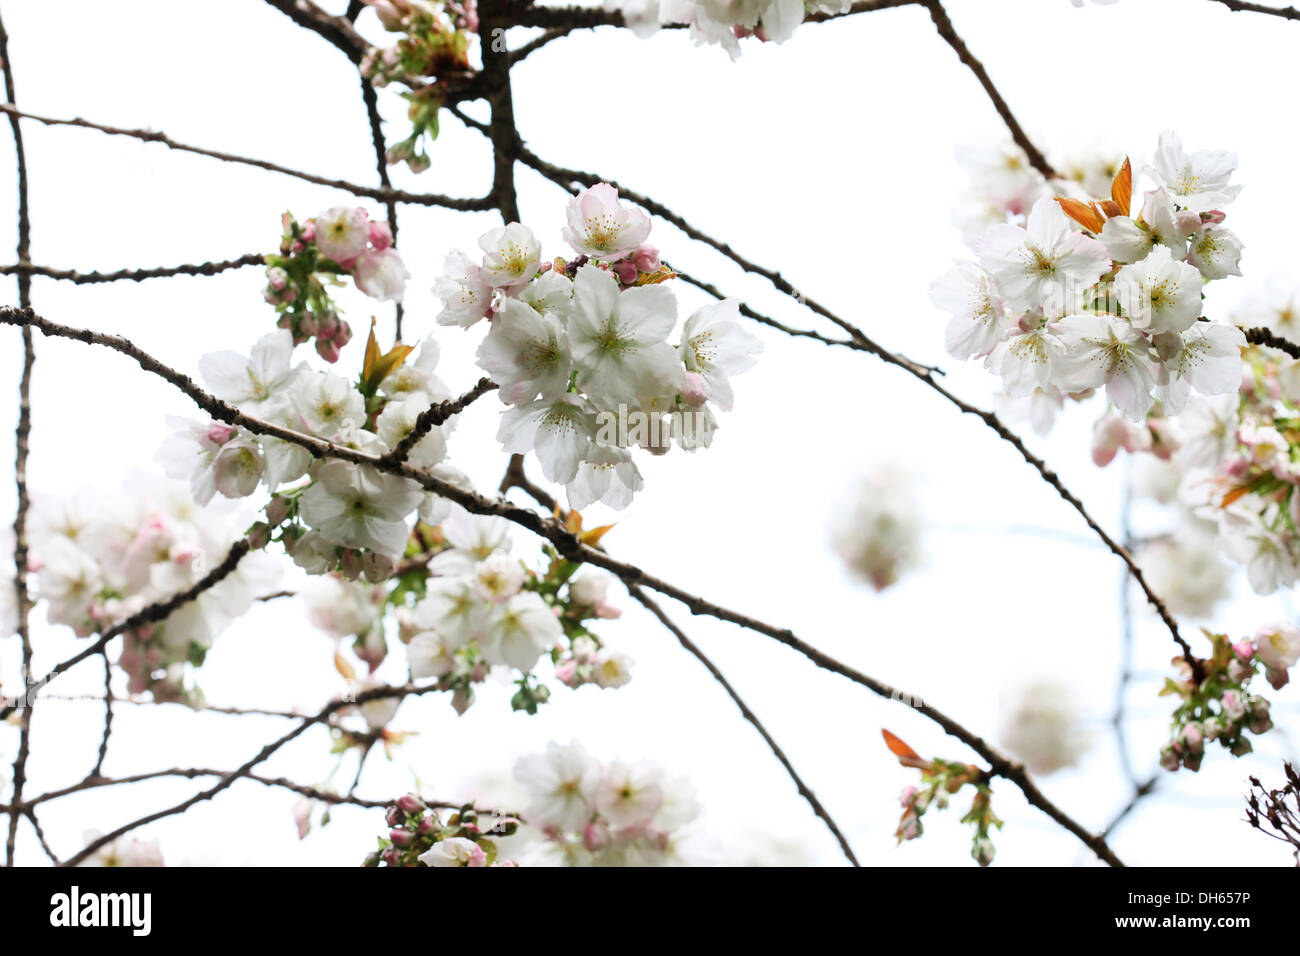 a taste of spring, beautiful clusters of great white cherry blossom Tai Haku  Jane Ann Butler Photography JABP1019 Stock Photo